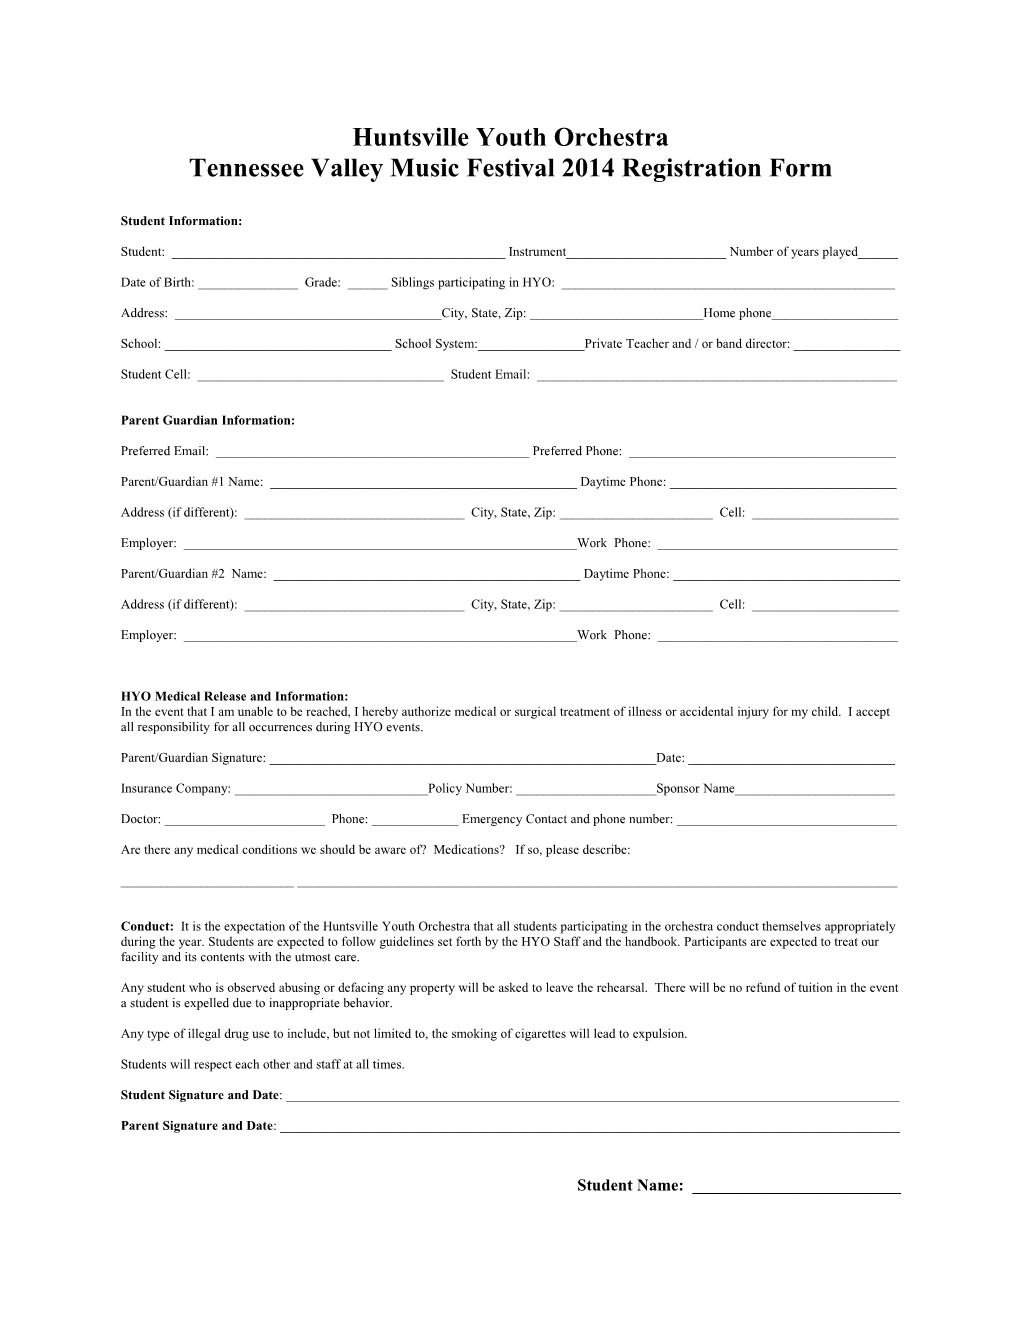 Tennessee Valley Music Festival 2014 Registration Form